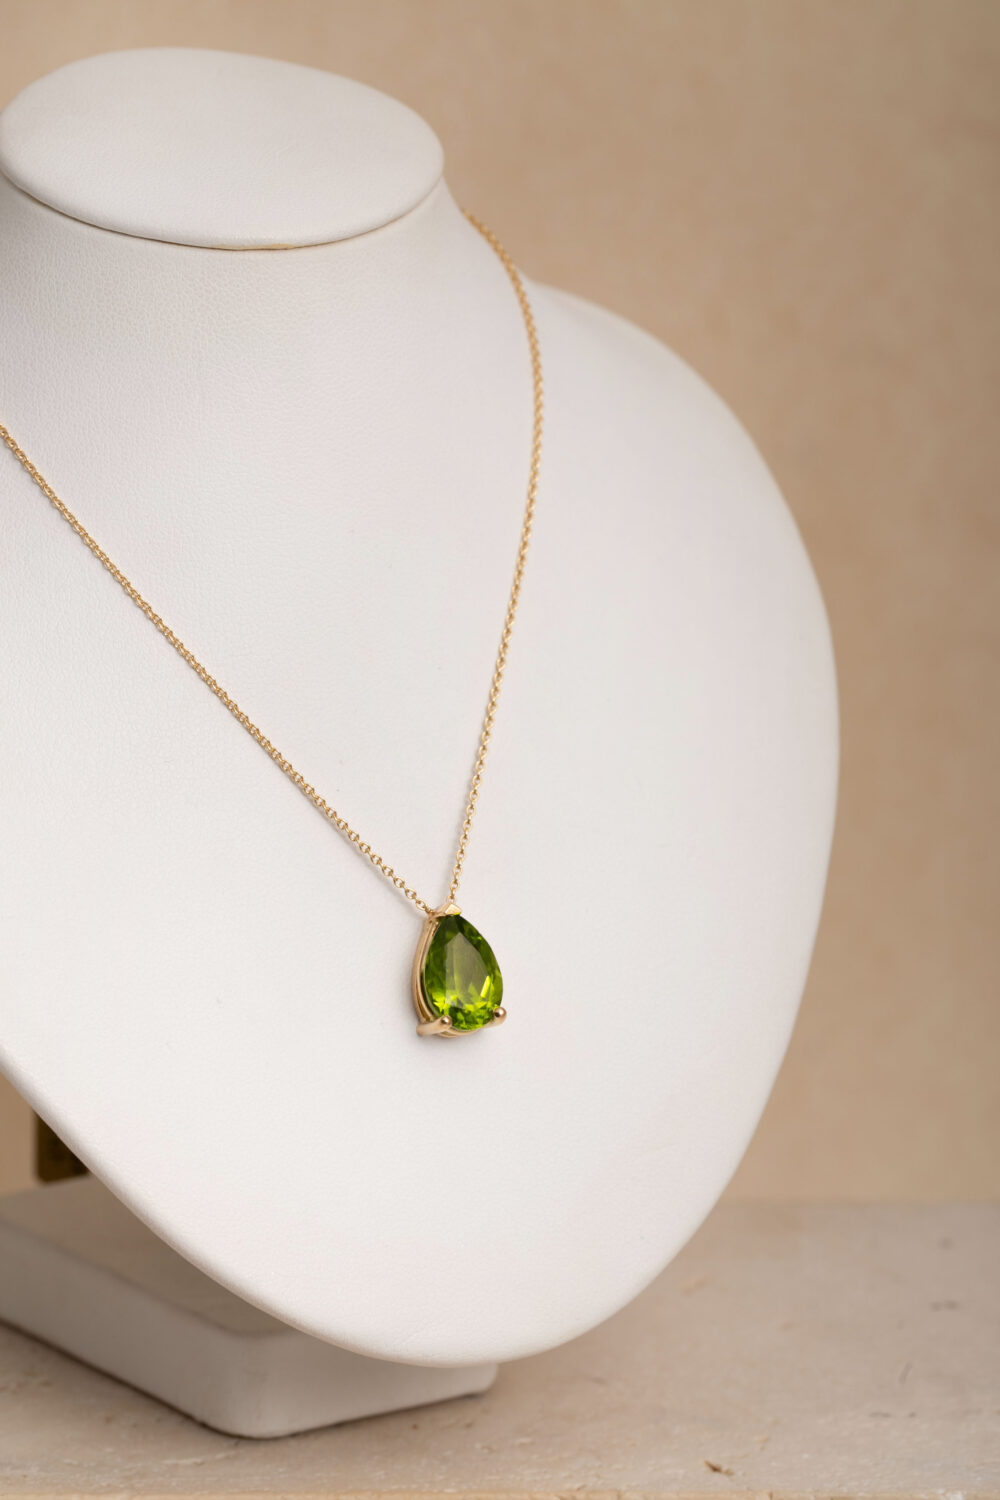 Necklace crafted from 18-karat gold with a pear shaped peridot gemstone hanger.